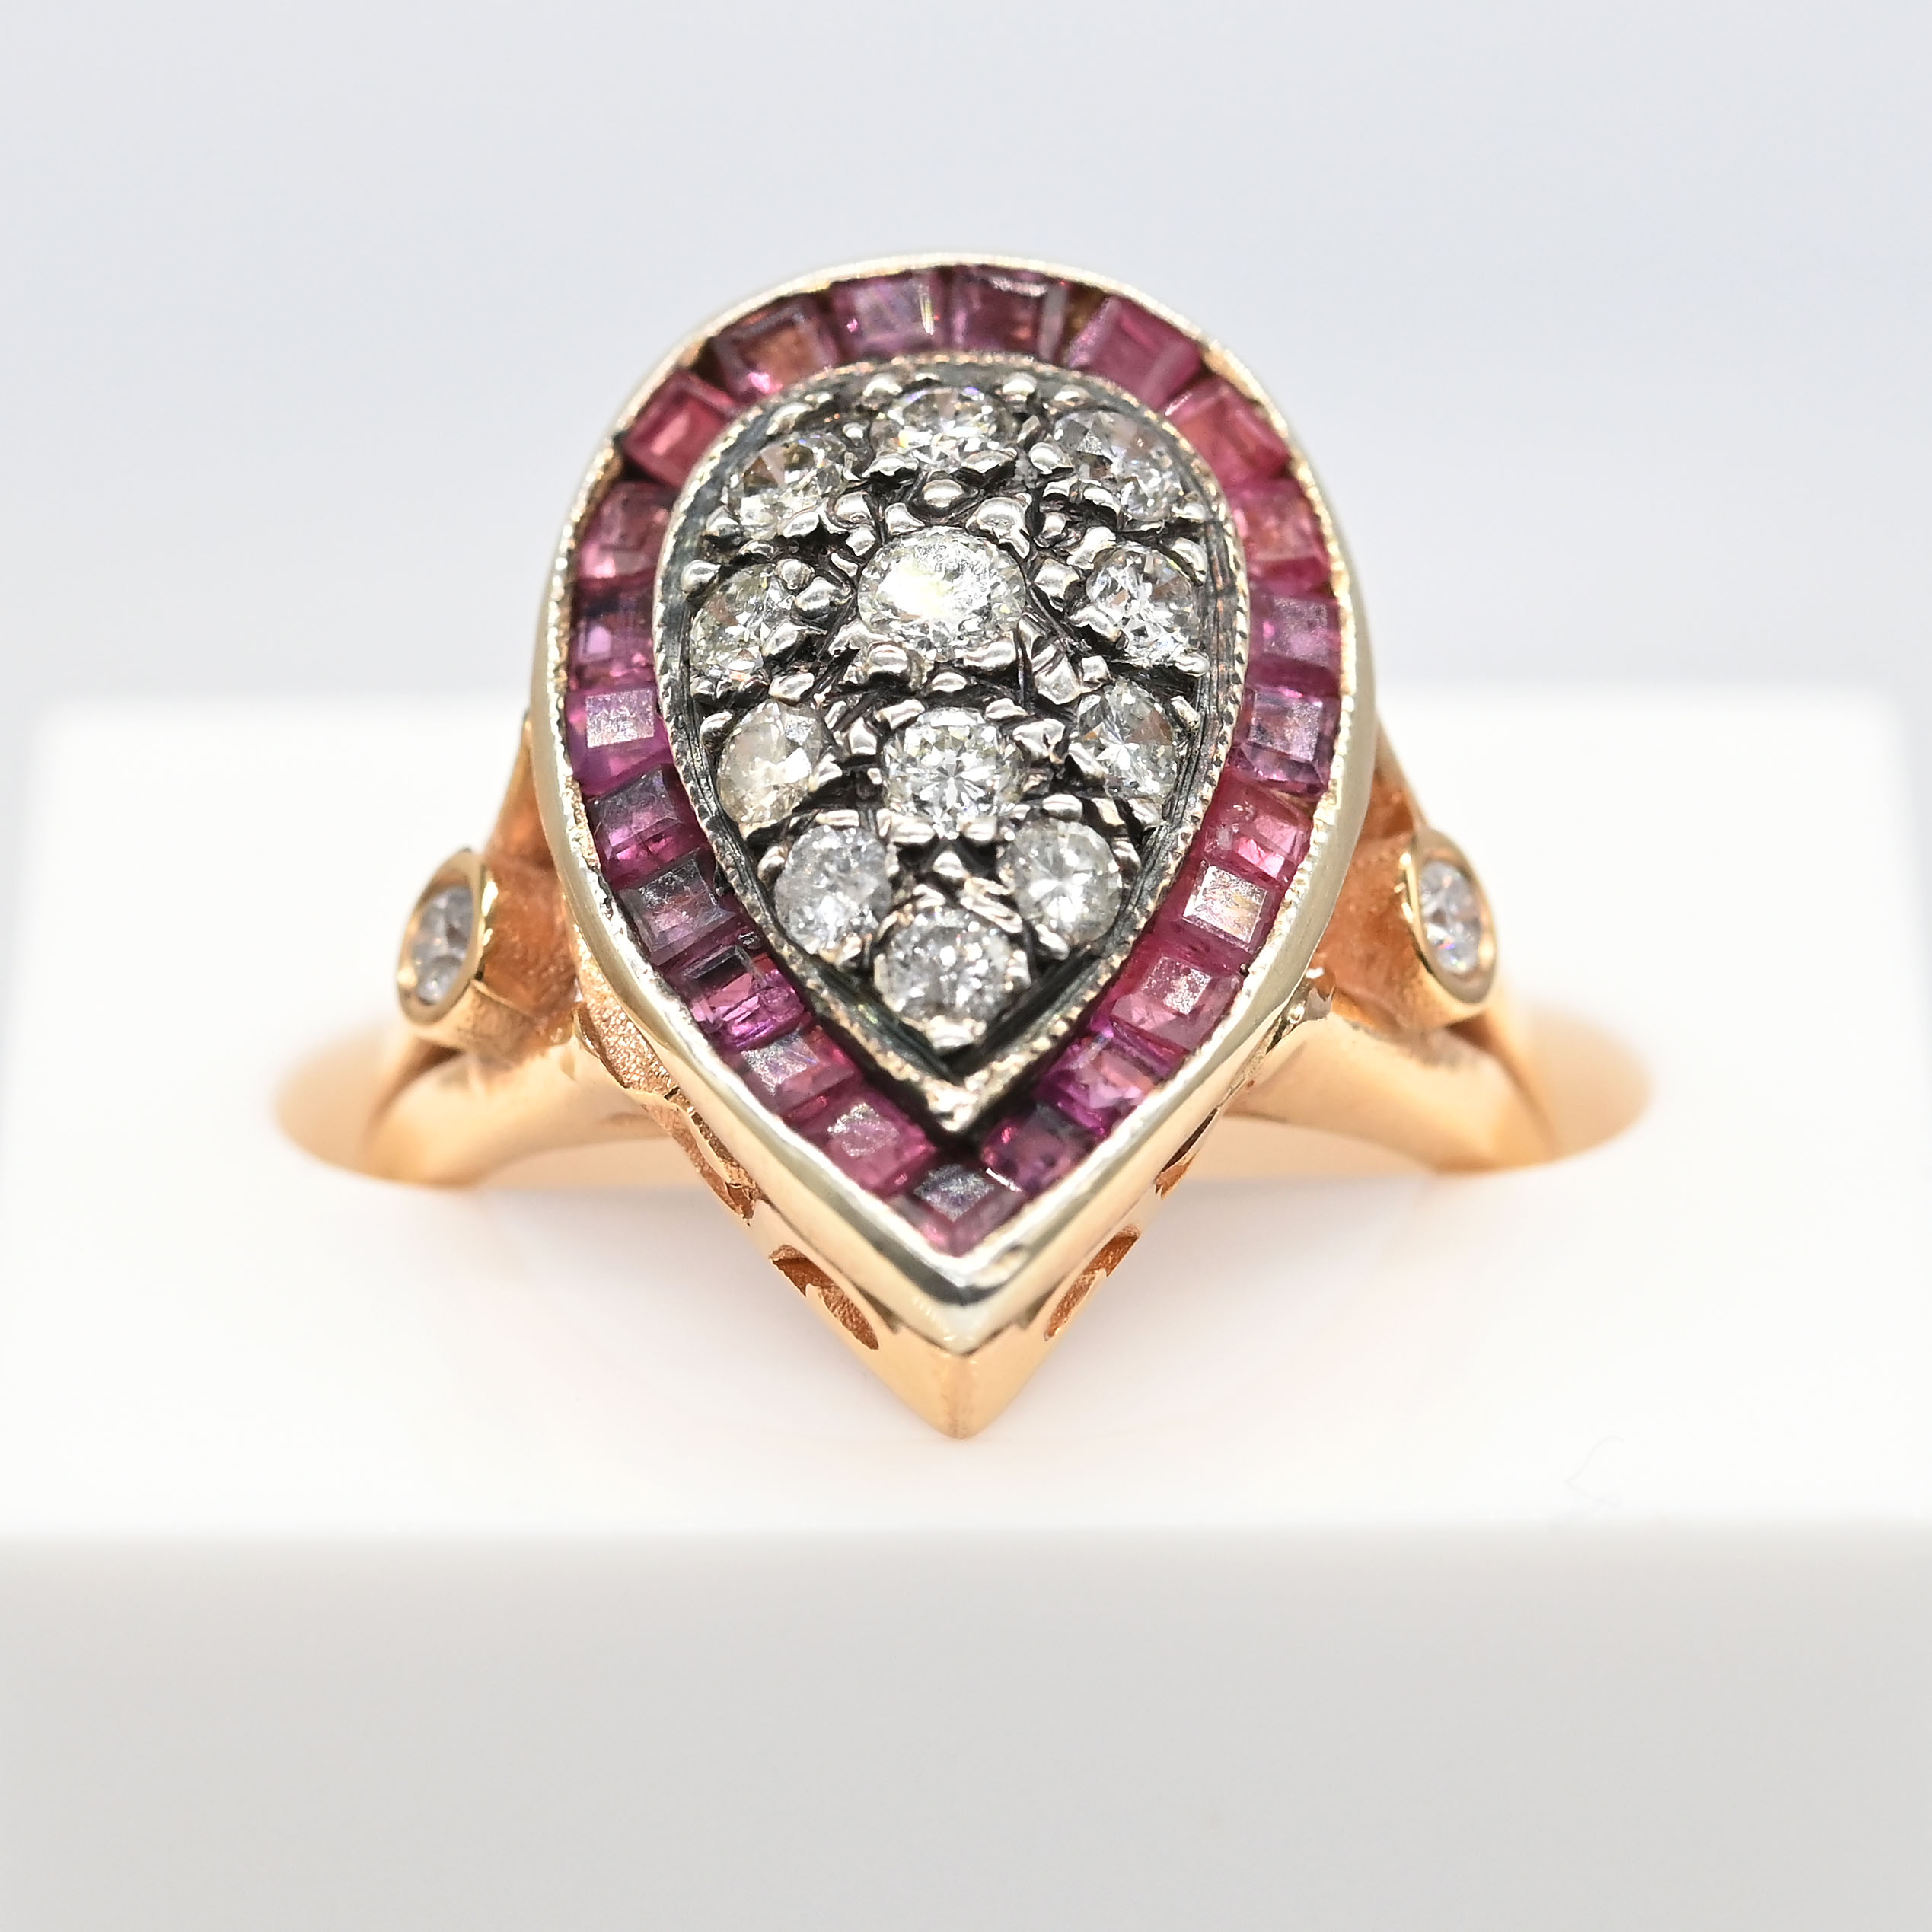 Hand-Made, Vintage Style Ruby and Diamond Pear-Shaped Ring - Image 3 of 8